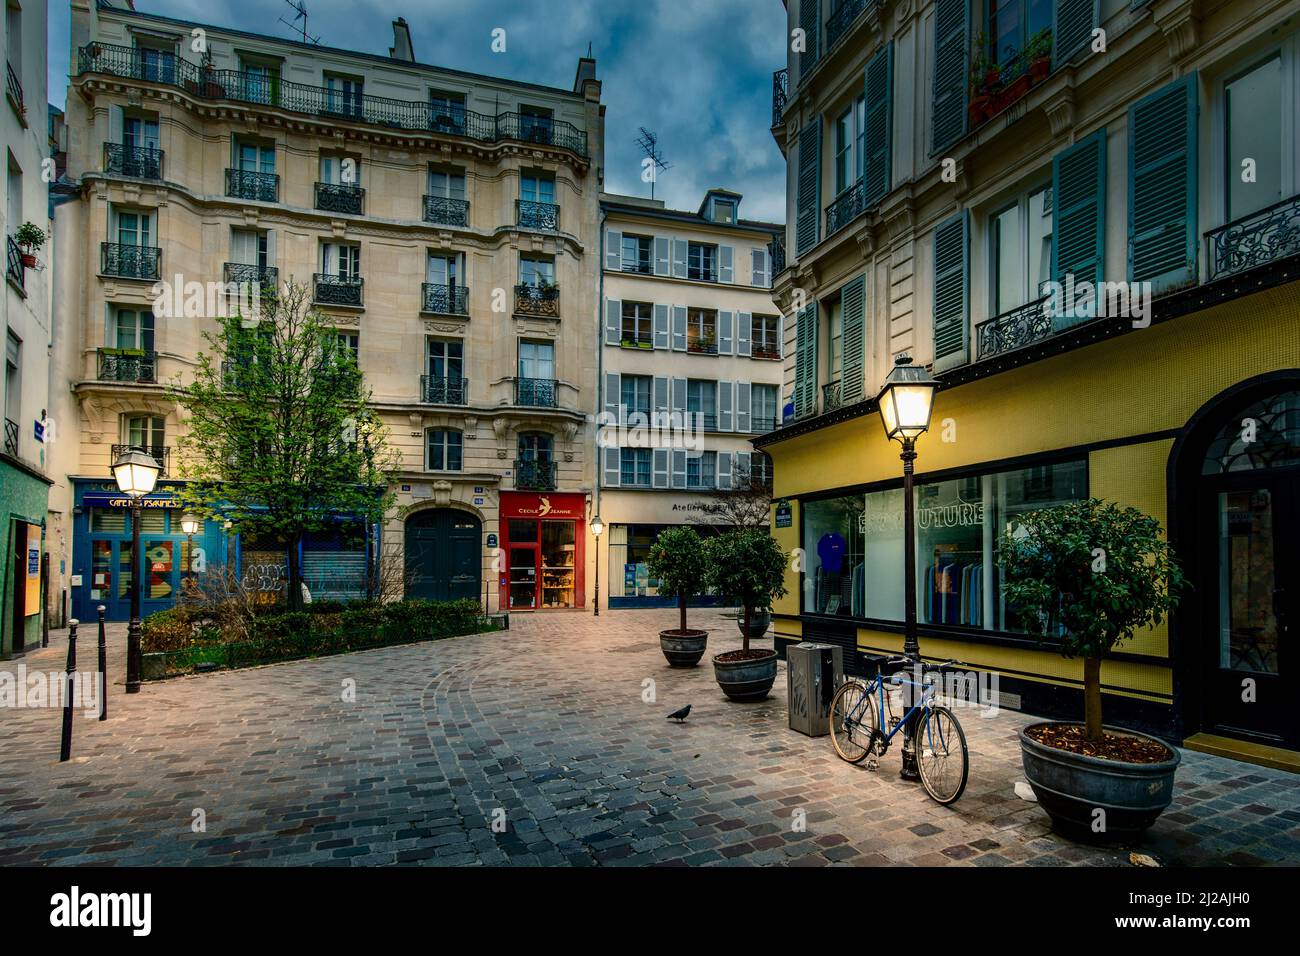 Paris, France - March 26, 2021: Typical street in Marais district with Rue des Rosiers in Paris Stock Photo